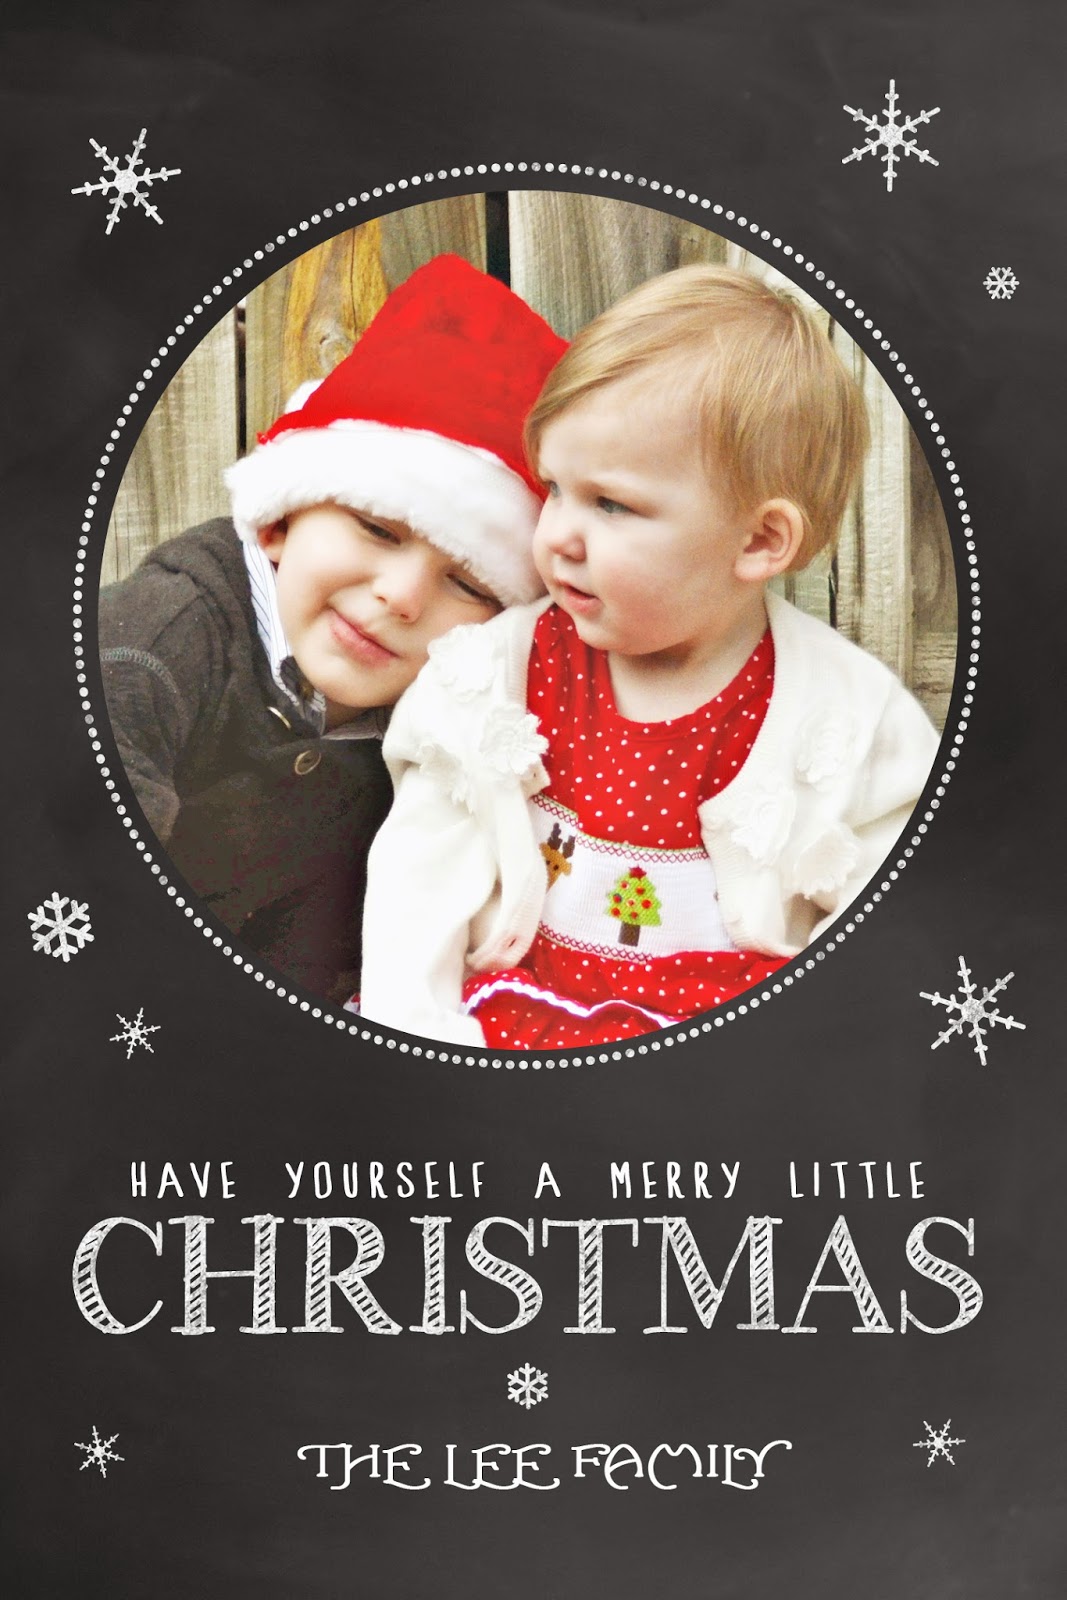 8 Free Photoshop Christmas Card Templates Images Photoshop Christmas Card Templates Free